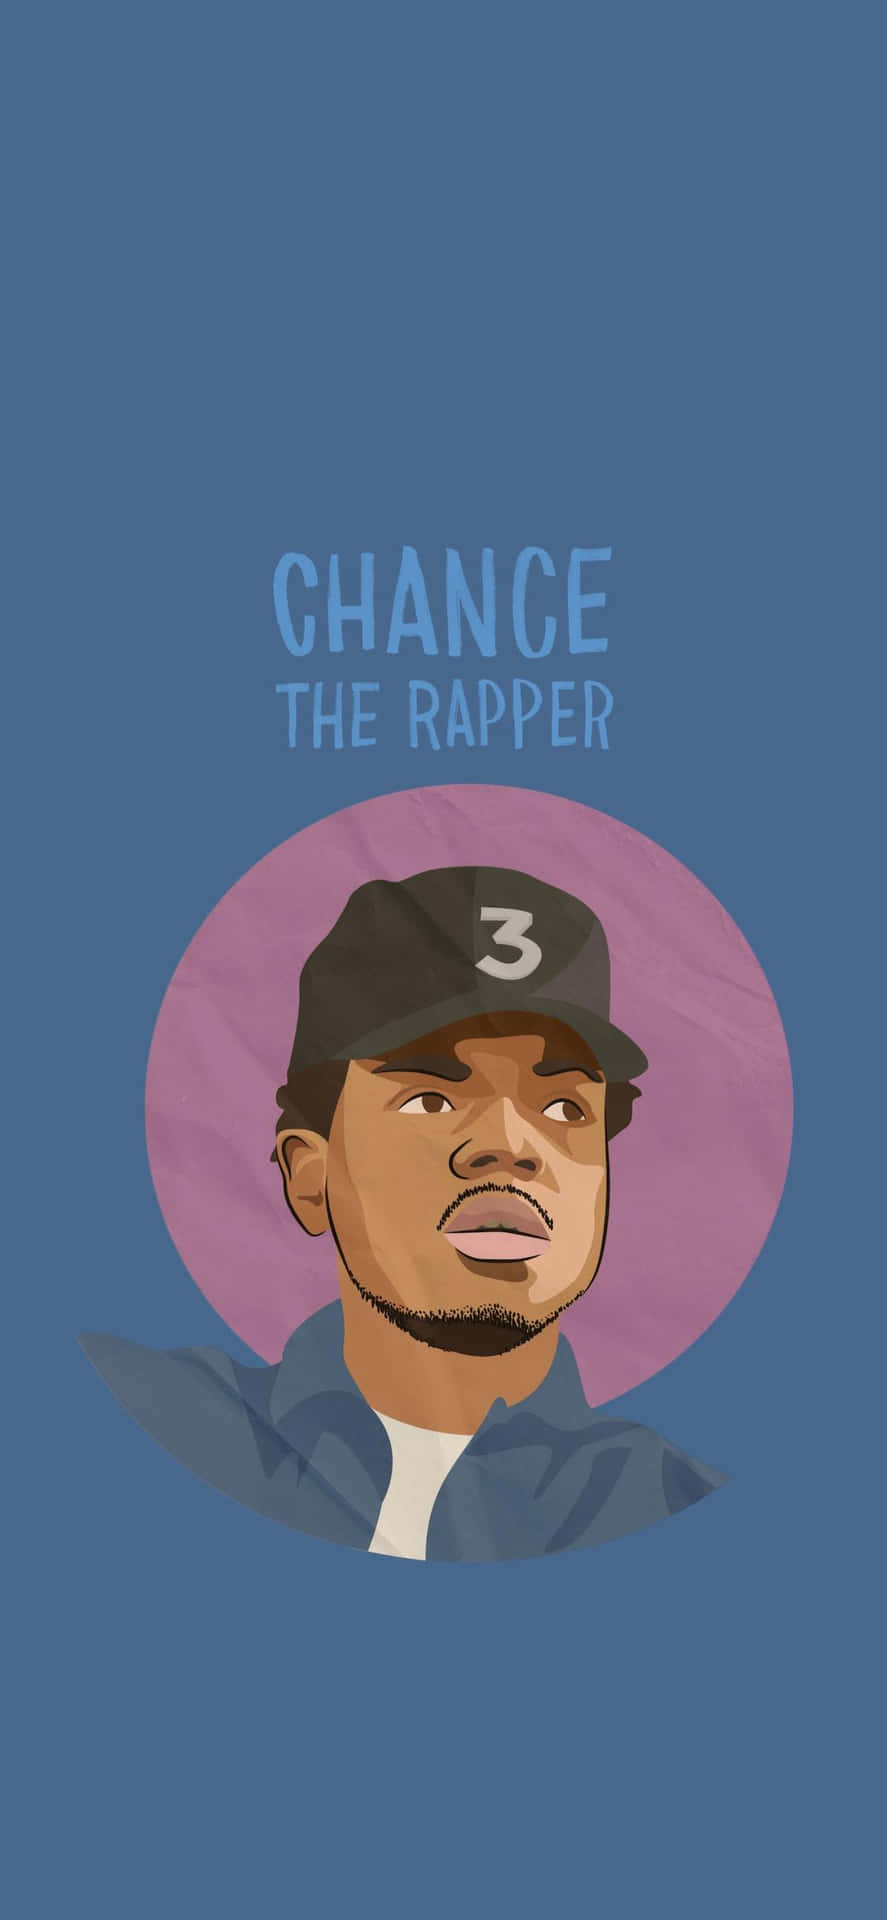 Chance the Rapper iPhone Wallpaper with high-resolution 1080x1920 pixel. You can use this wallpaper for your iPhone 5, 6, 7, 8, X, XS, XR backgrounds, Mobile Screensaver, or iPad Lock Screen - Chance the Rapper